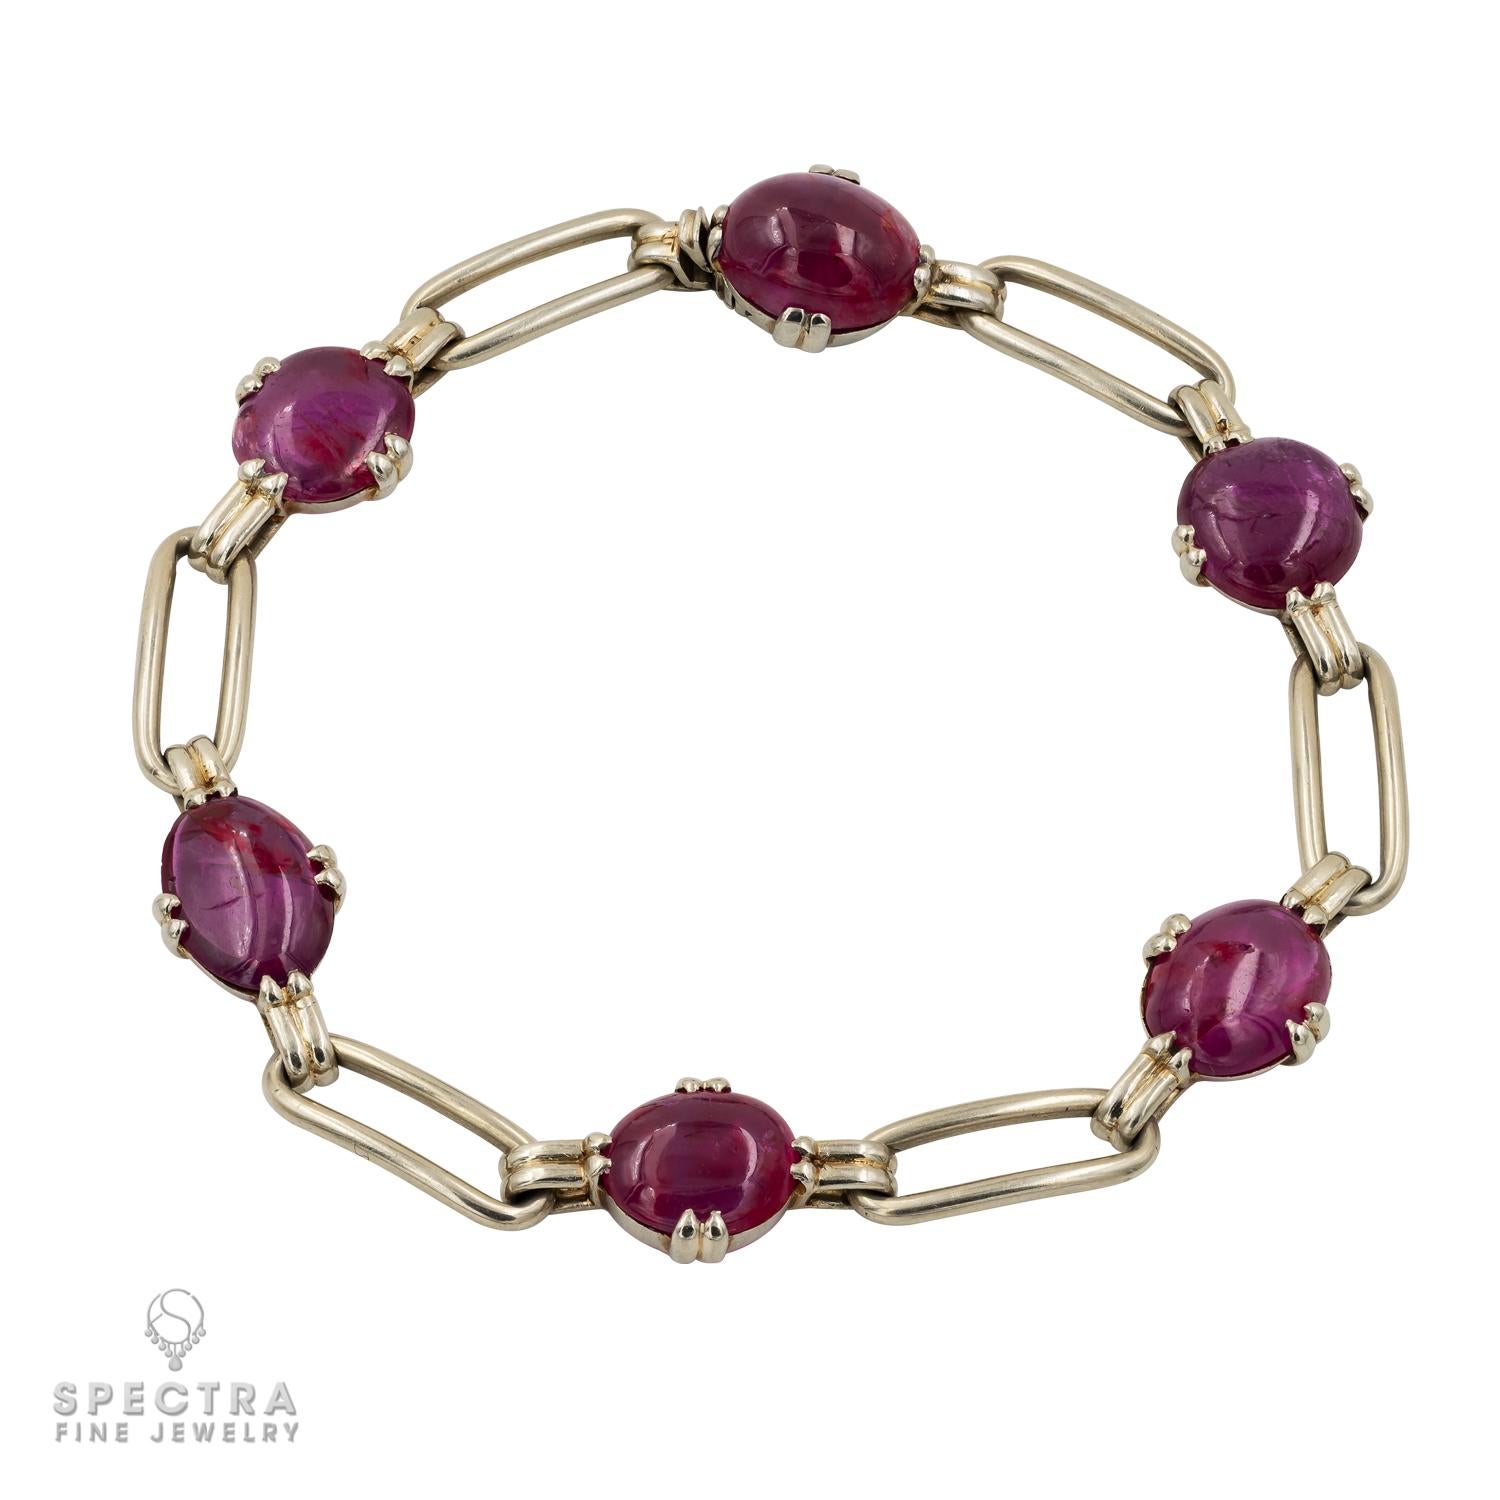 Sometimes a simple design is best when showing off gorgeous gemstones. Here the cabochon rubies are the stars of the show, supported attractively by an openwork link chain. The oval and rectangle shapes play off each other nicely. The Georges